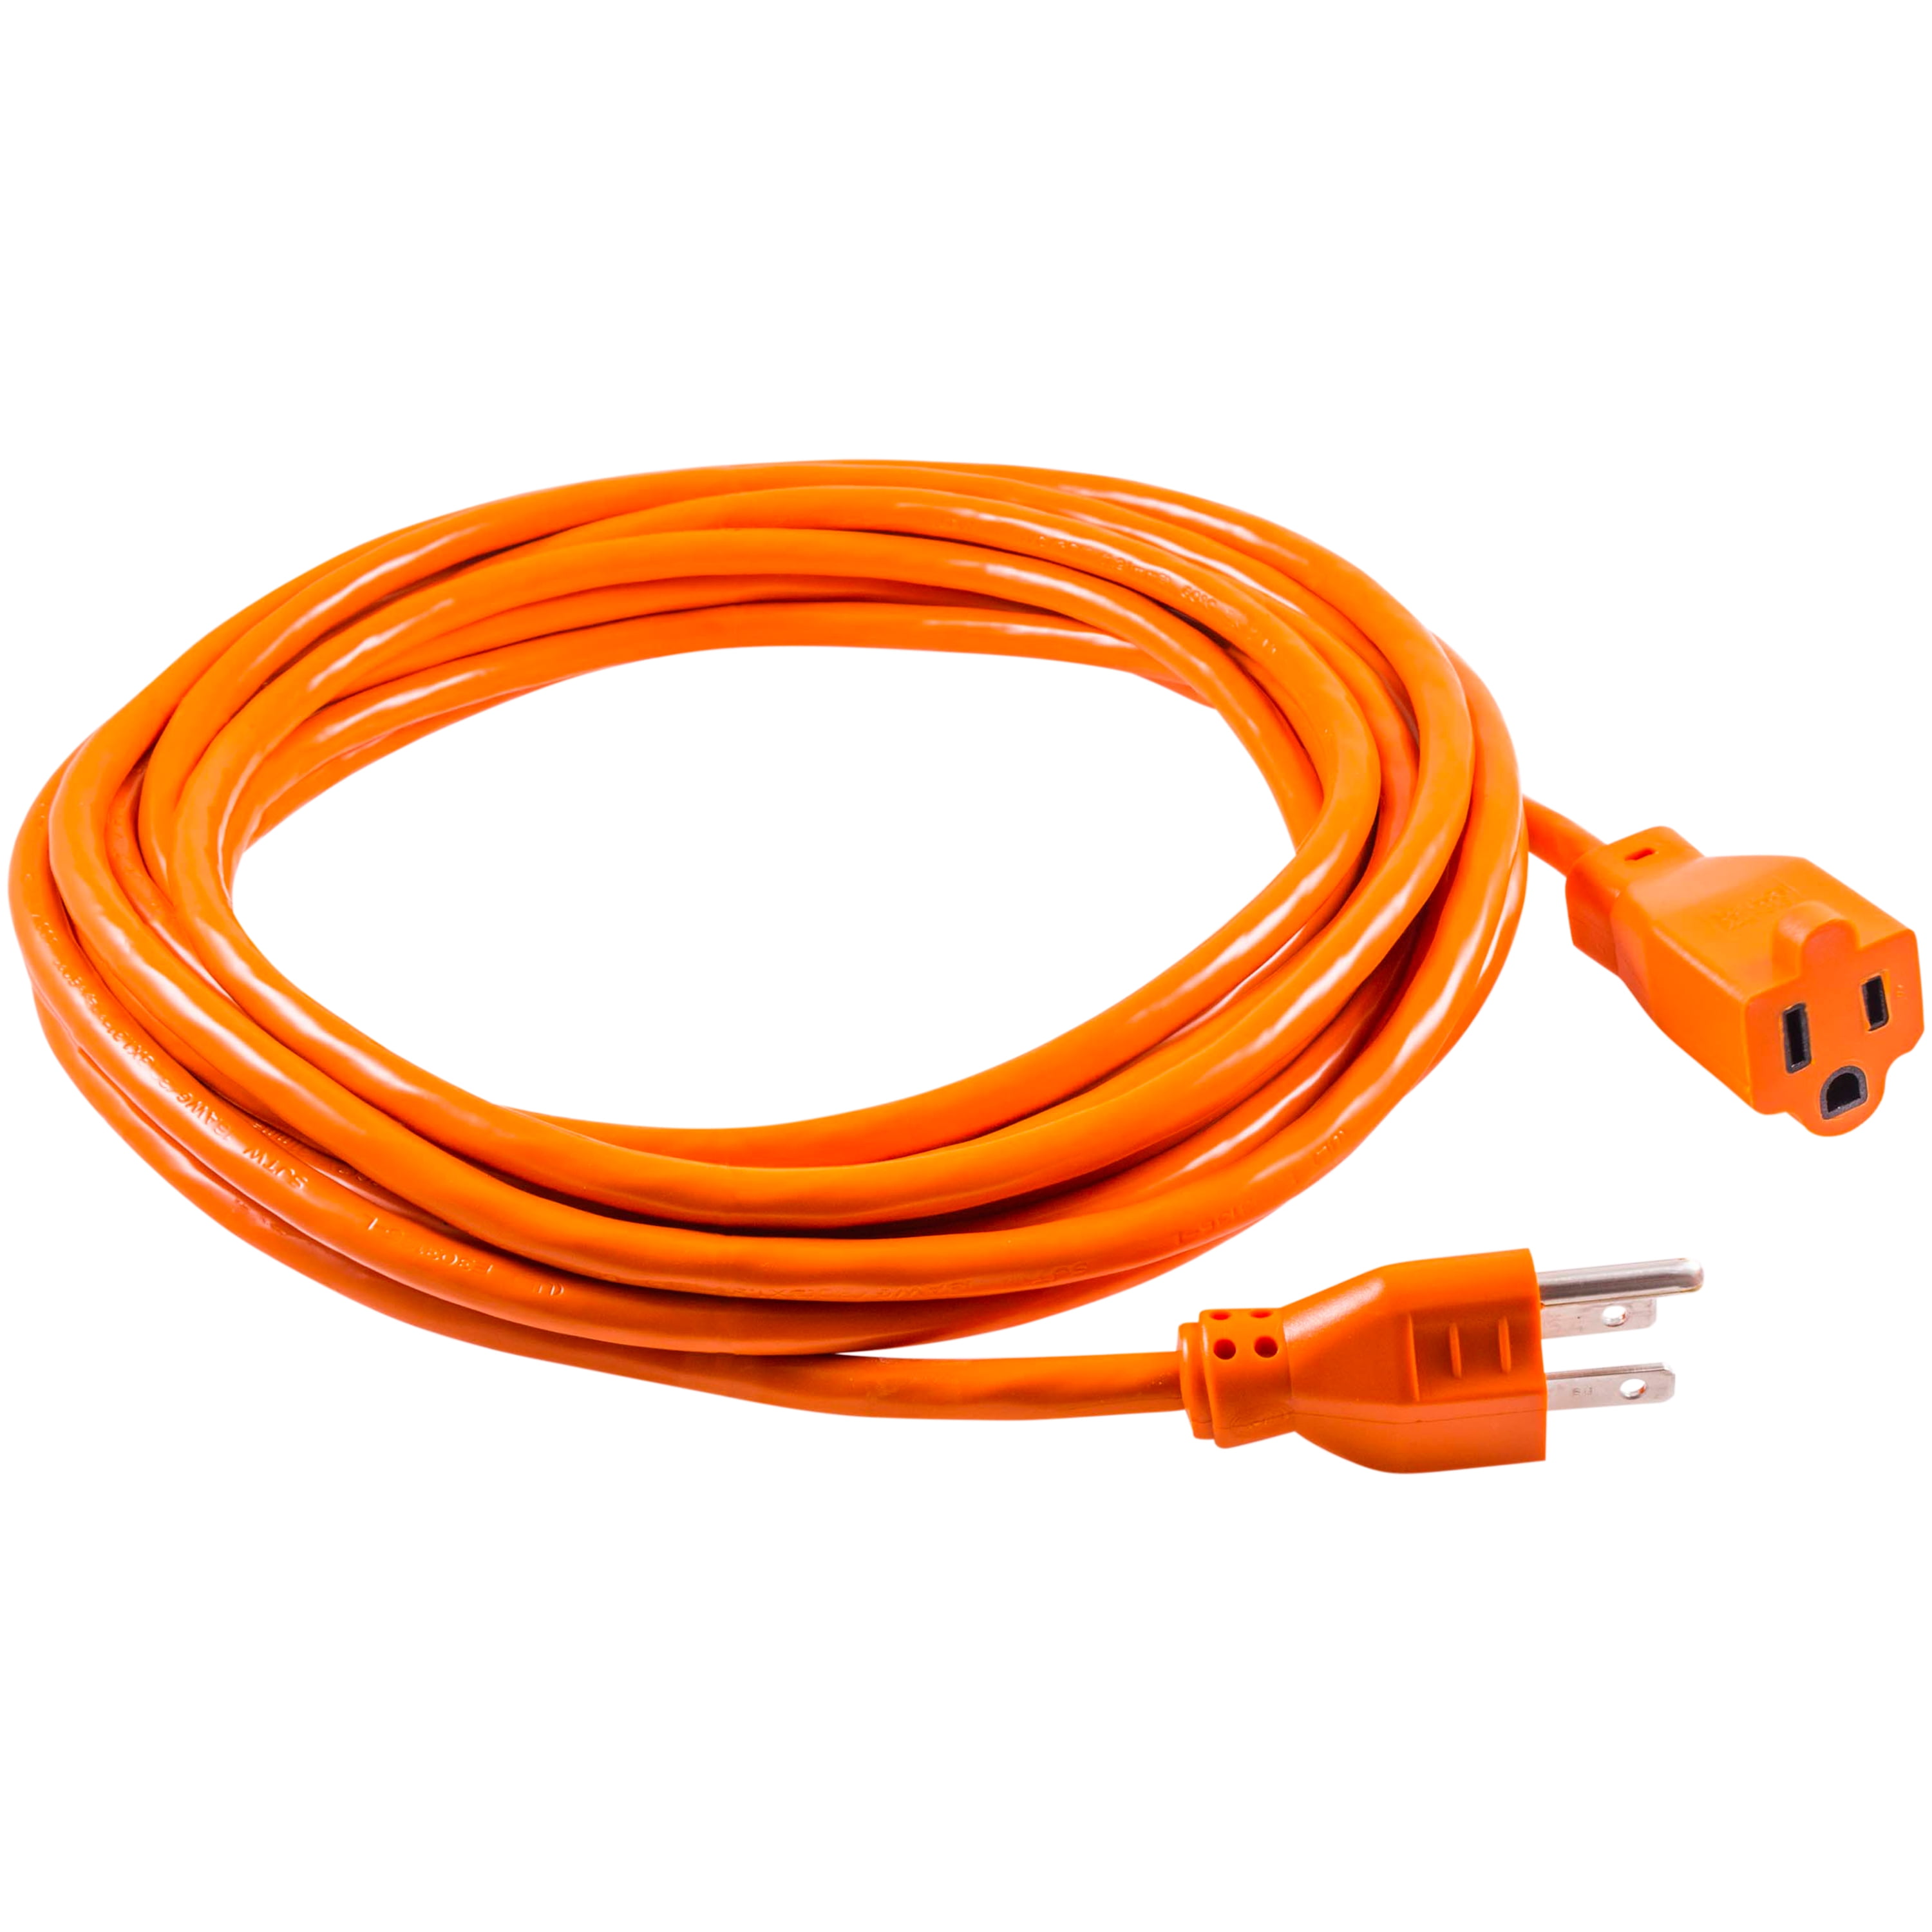 UltraPro Orange Heavy Duty 5-Outlet Hub, 8ft Grounded Outdoor Extension Cord, 14 AWG, Resettable Circuit Breaker and Storage Hook, Ideal for